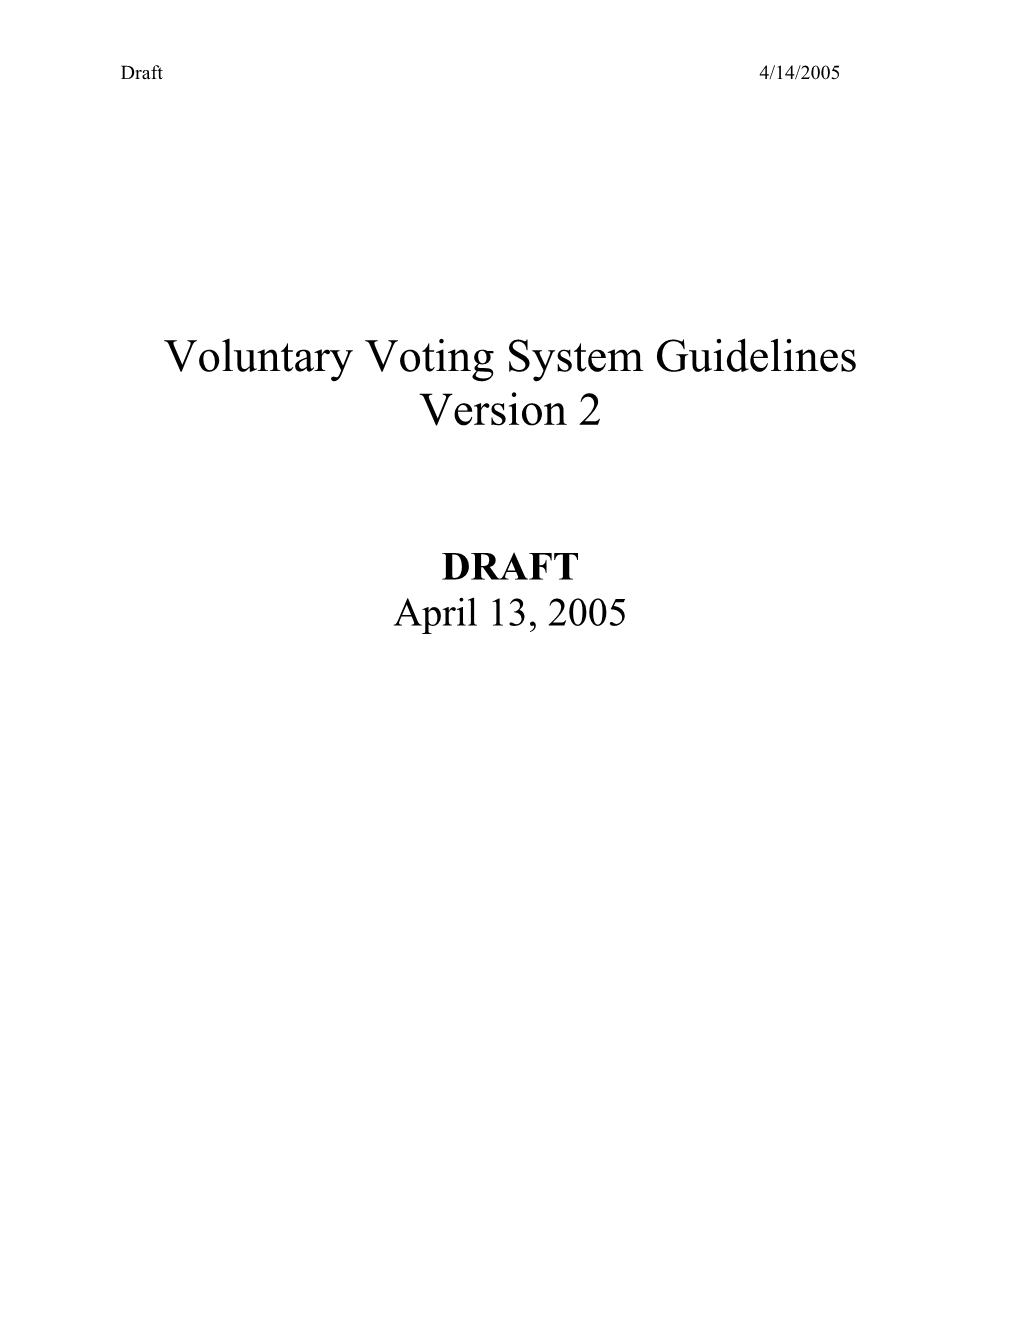 Voluntary Voting System Guidelines (Version 2-Draft)